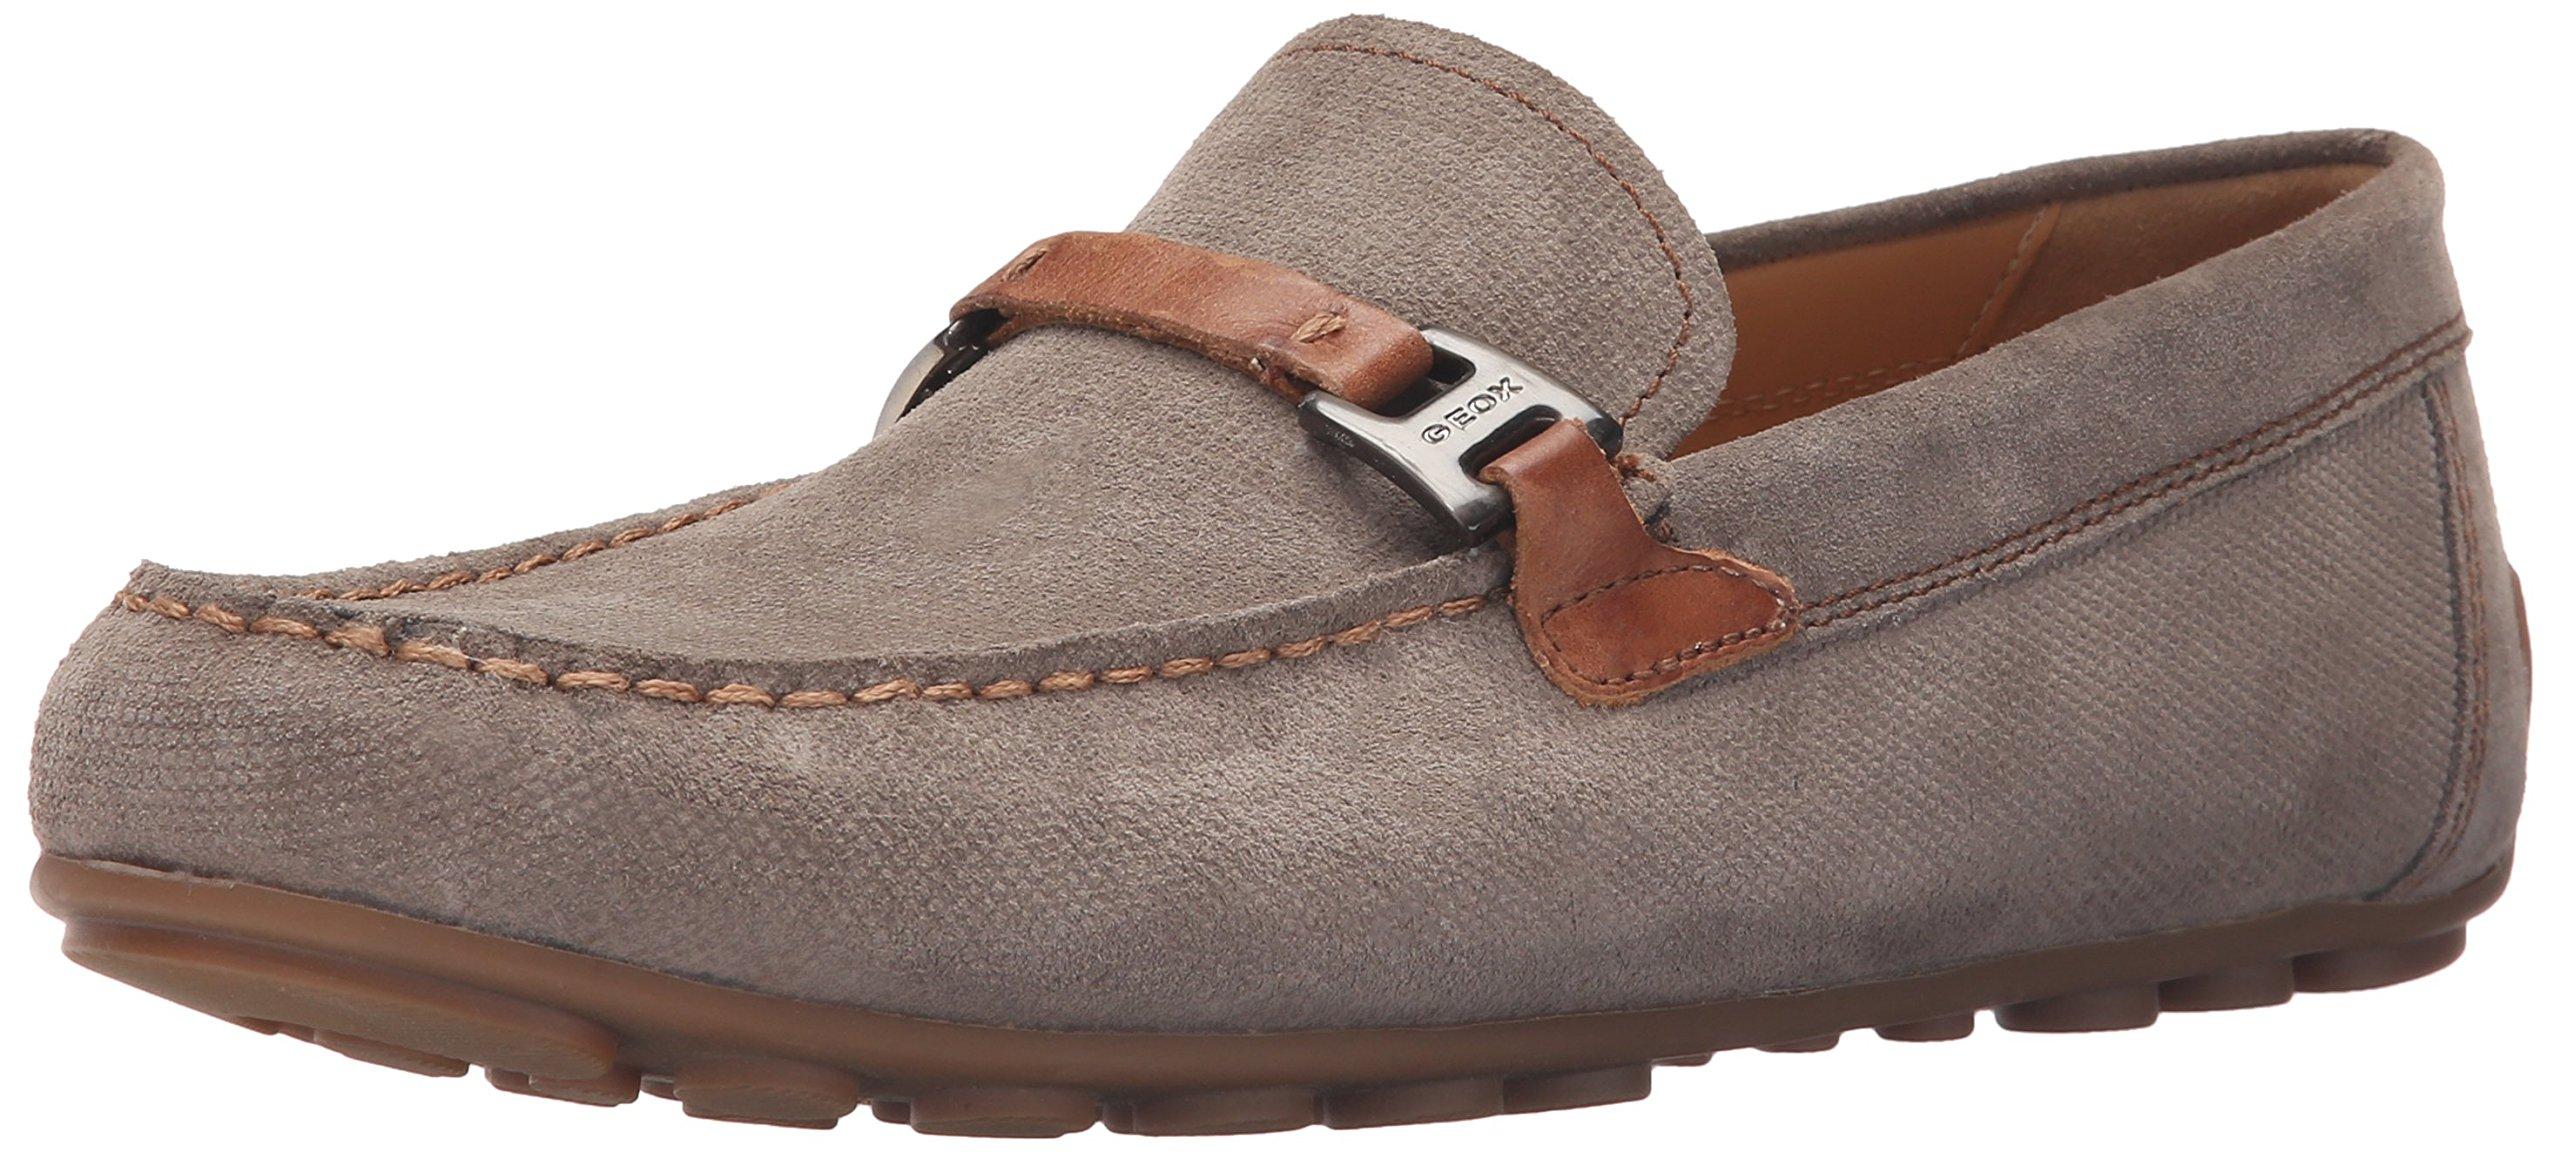 Geox Mgiona2 Slip-on Loafer in Gray for Men - Lyst